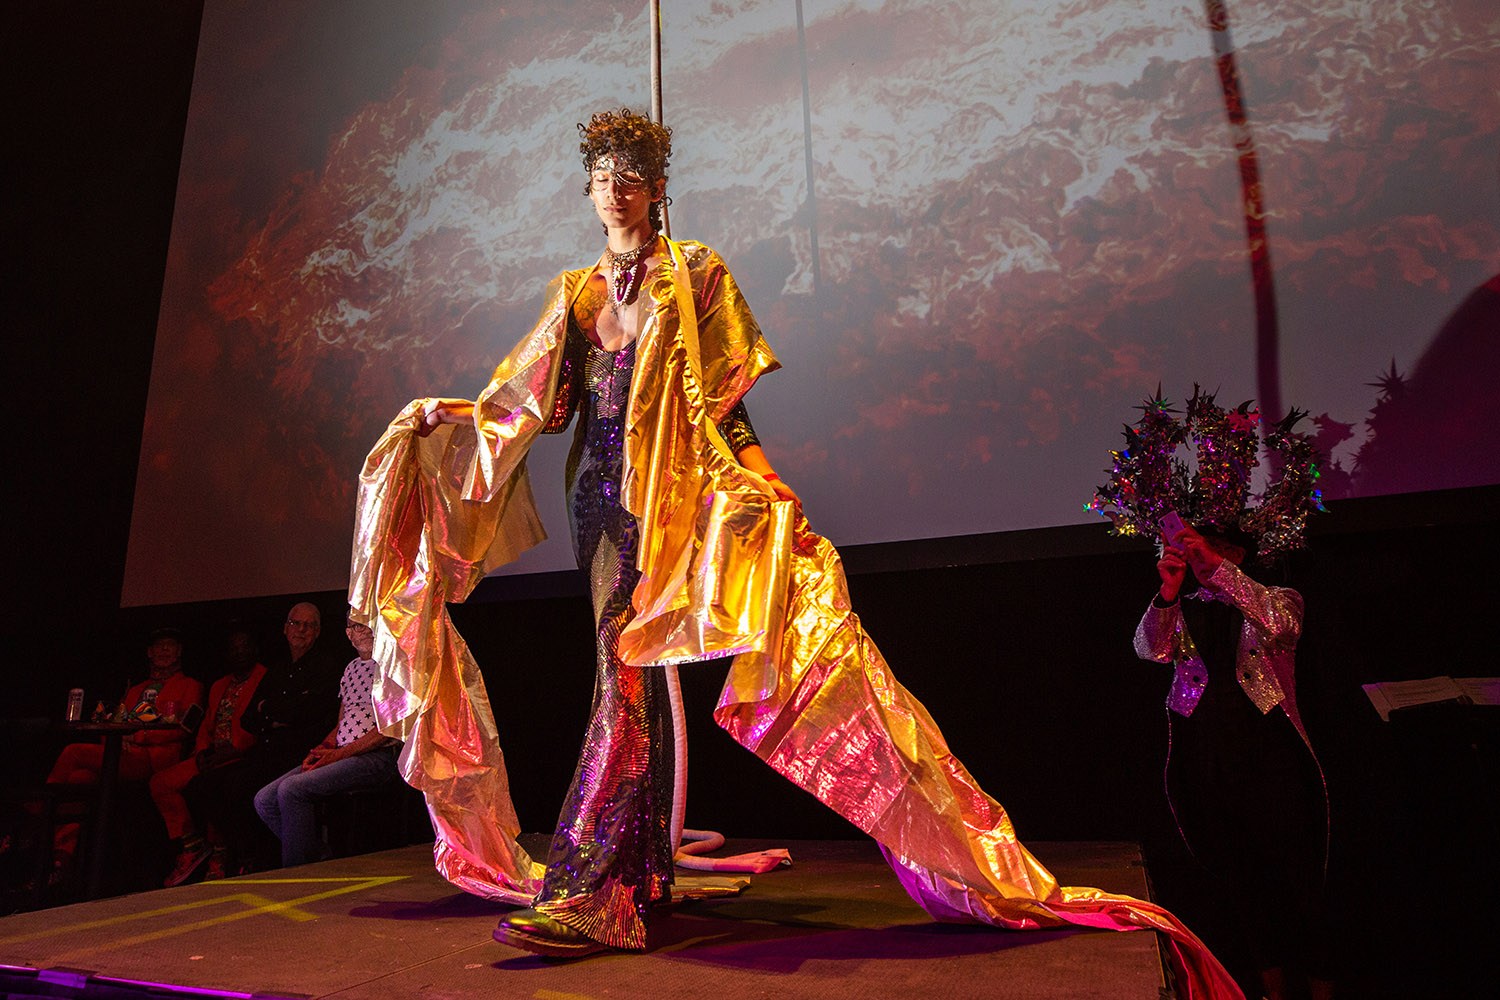 Alejo Peña Soto models one of Augusto Cuellar’s designs during a fashion show at the WEBB Party on Friday night, April 1, 2022, at the Aztec Theater in downtown San Antonio, Texas. Photo by Kaylee Greenlee Beal | Heron contributor